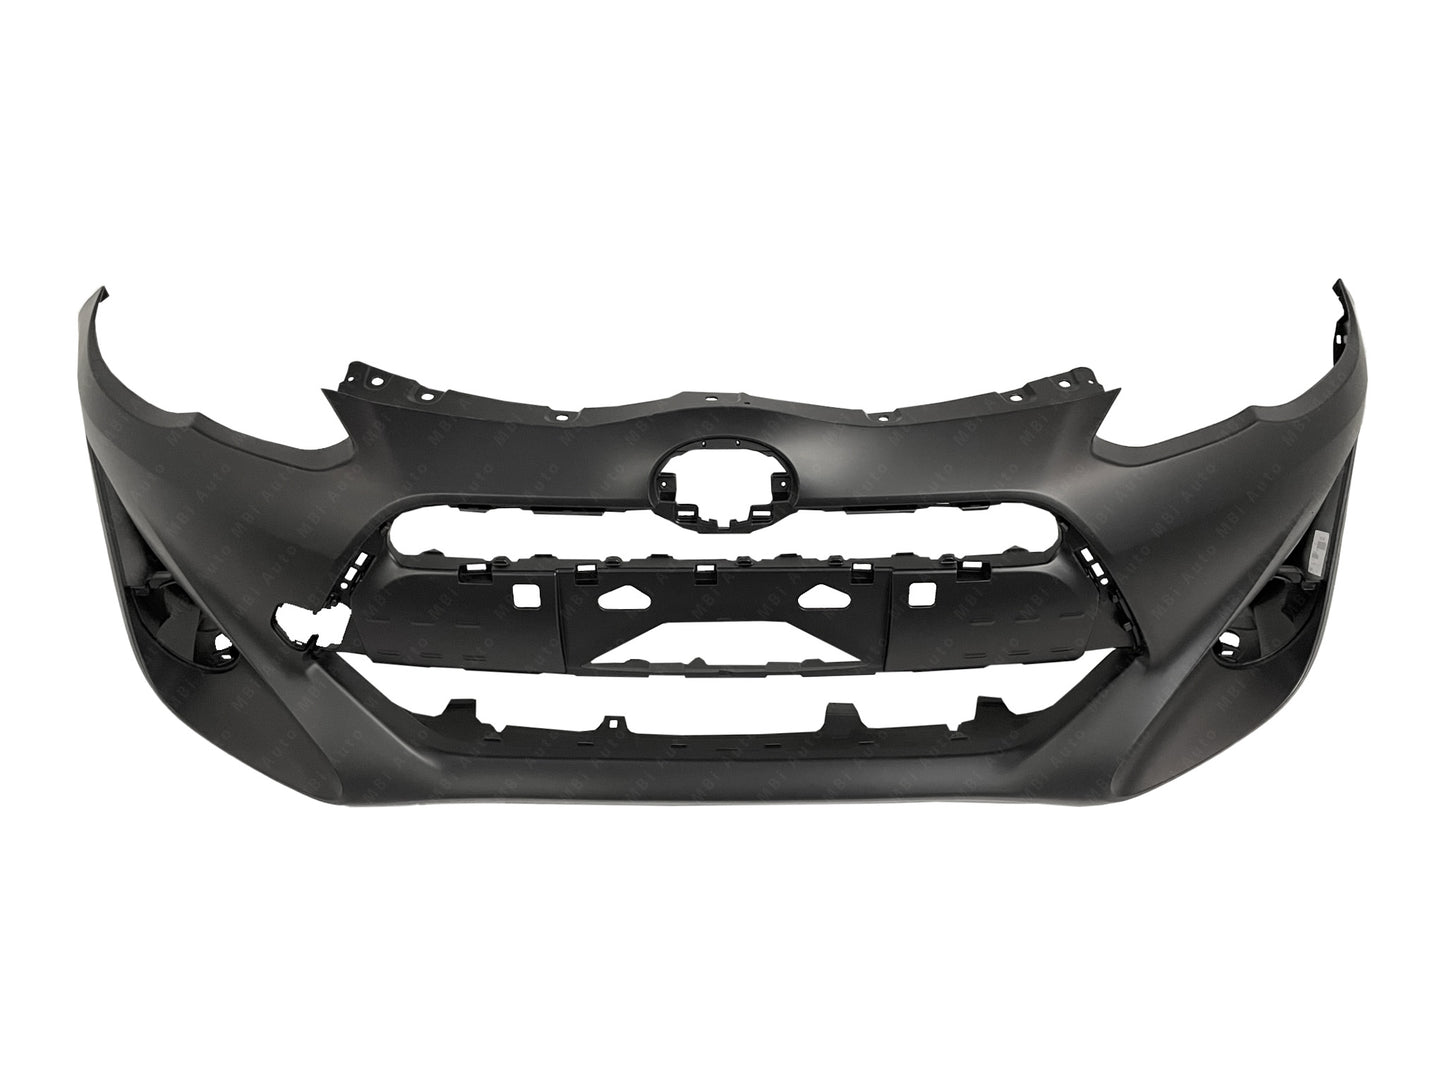 Toyota Prius 2015 - 2016 Front Bumper Cover 15 - 16 TO1000413 Bumper King